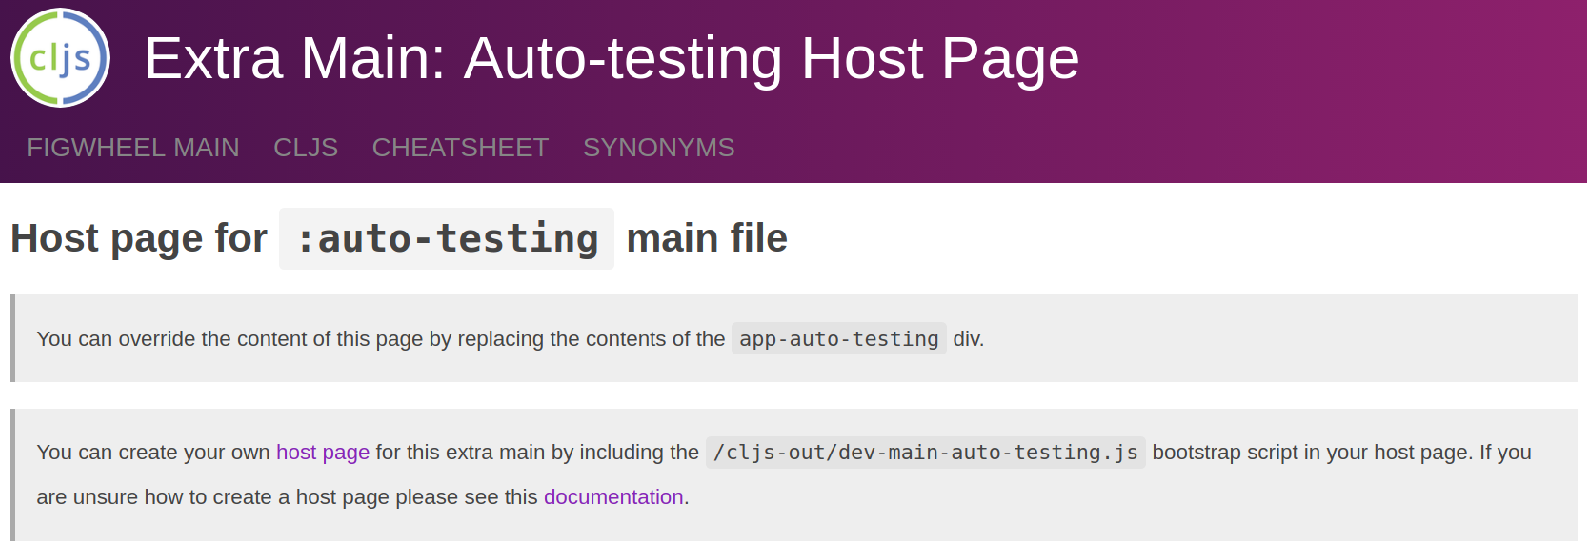 Figwheel-main - tests - auto-testng host page